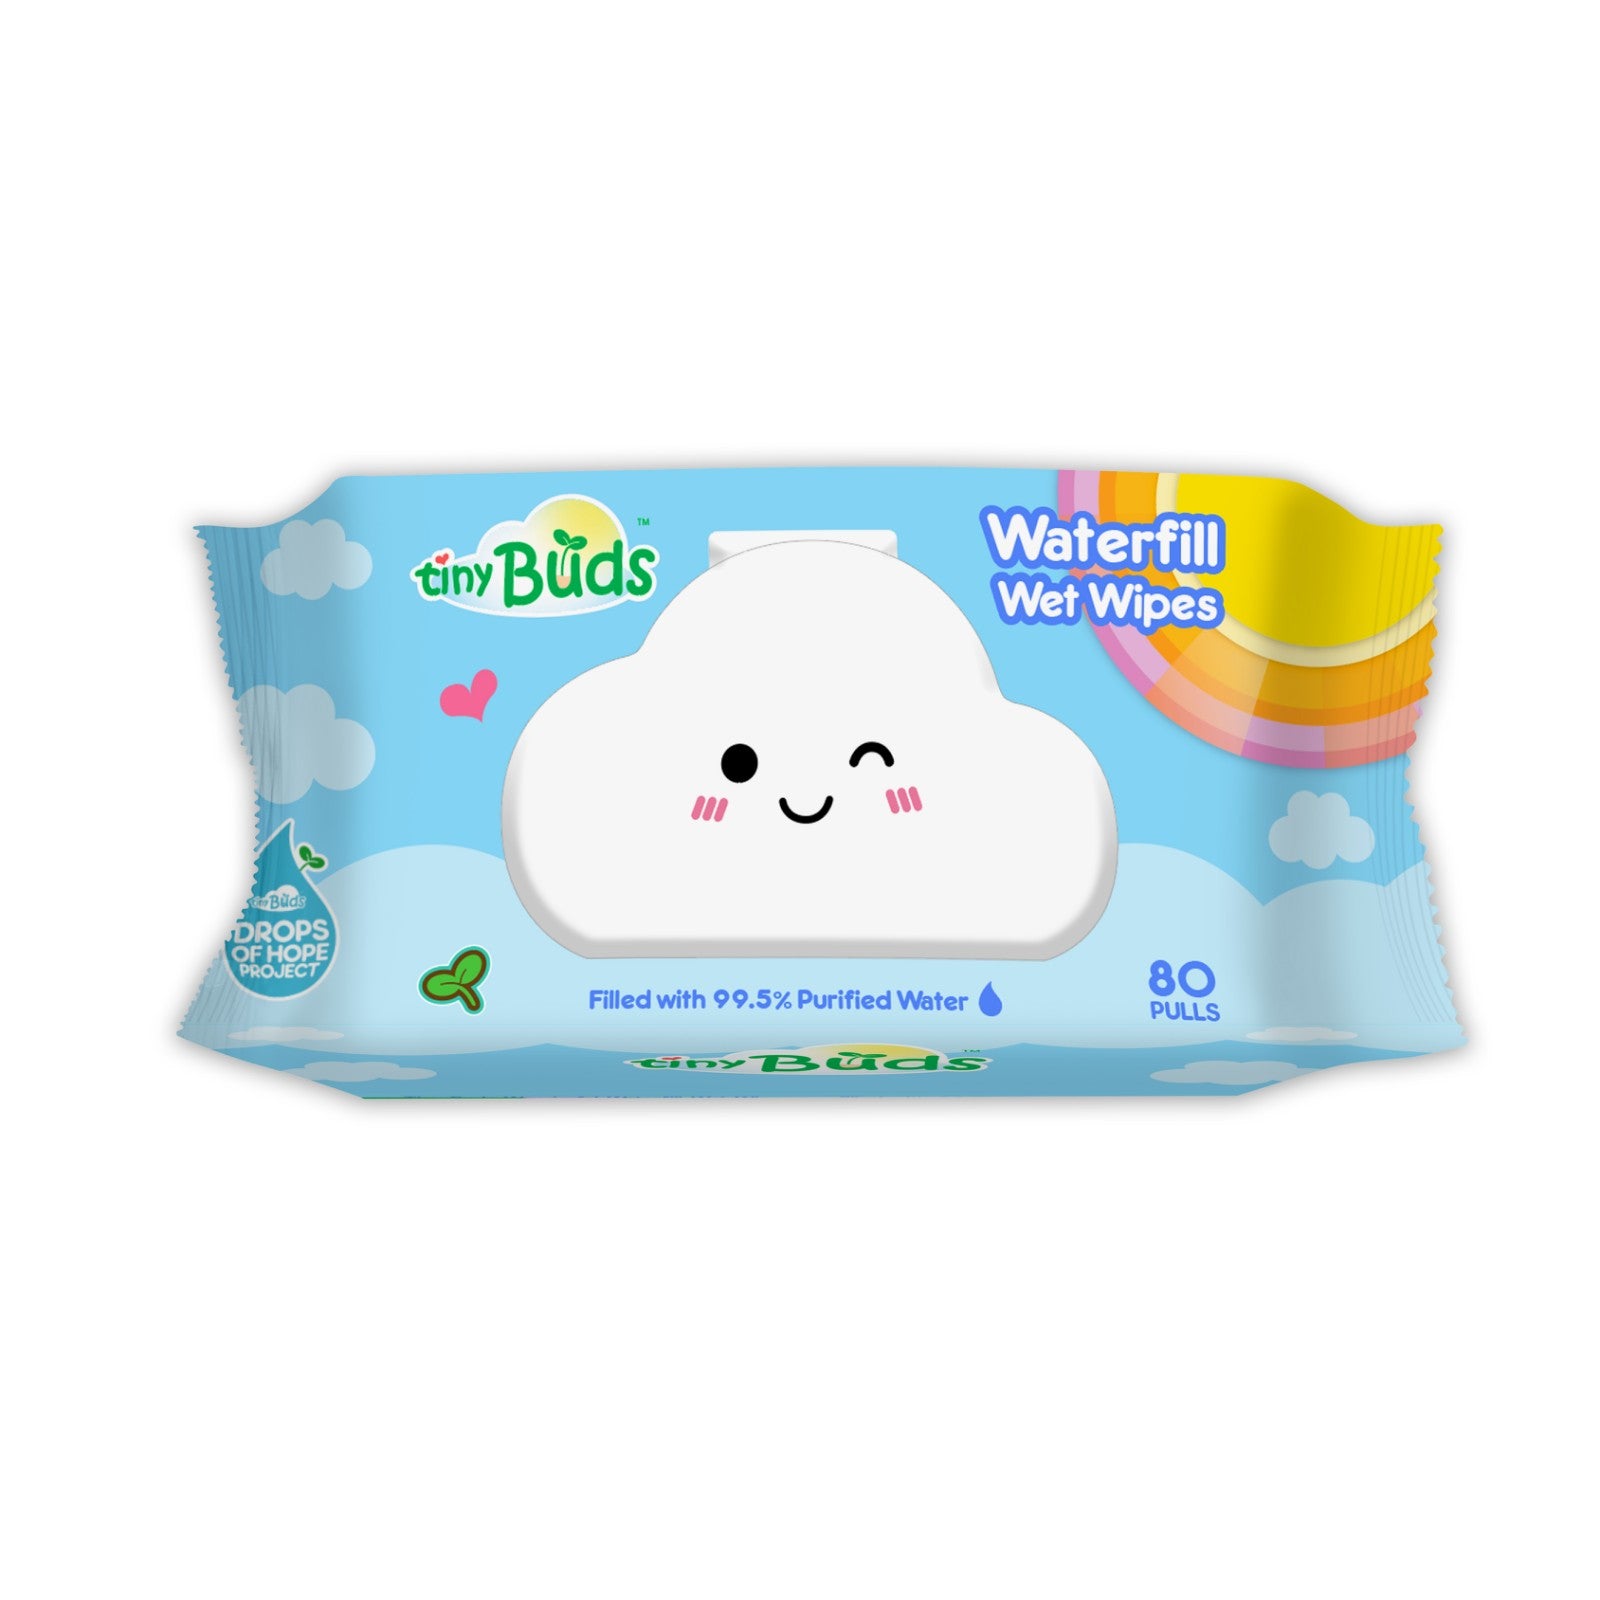 Tiny Buds Waterfill Wet Wipes (80 Pulls)